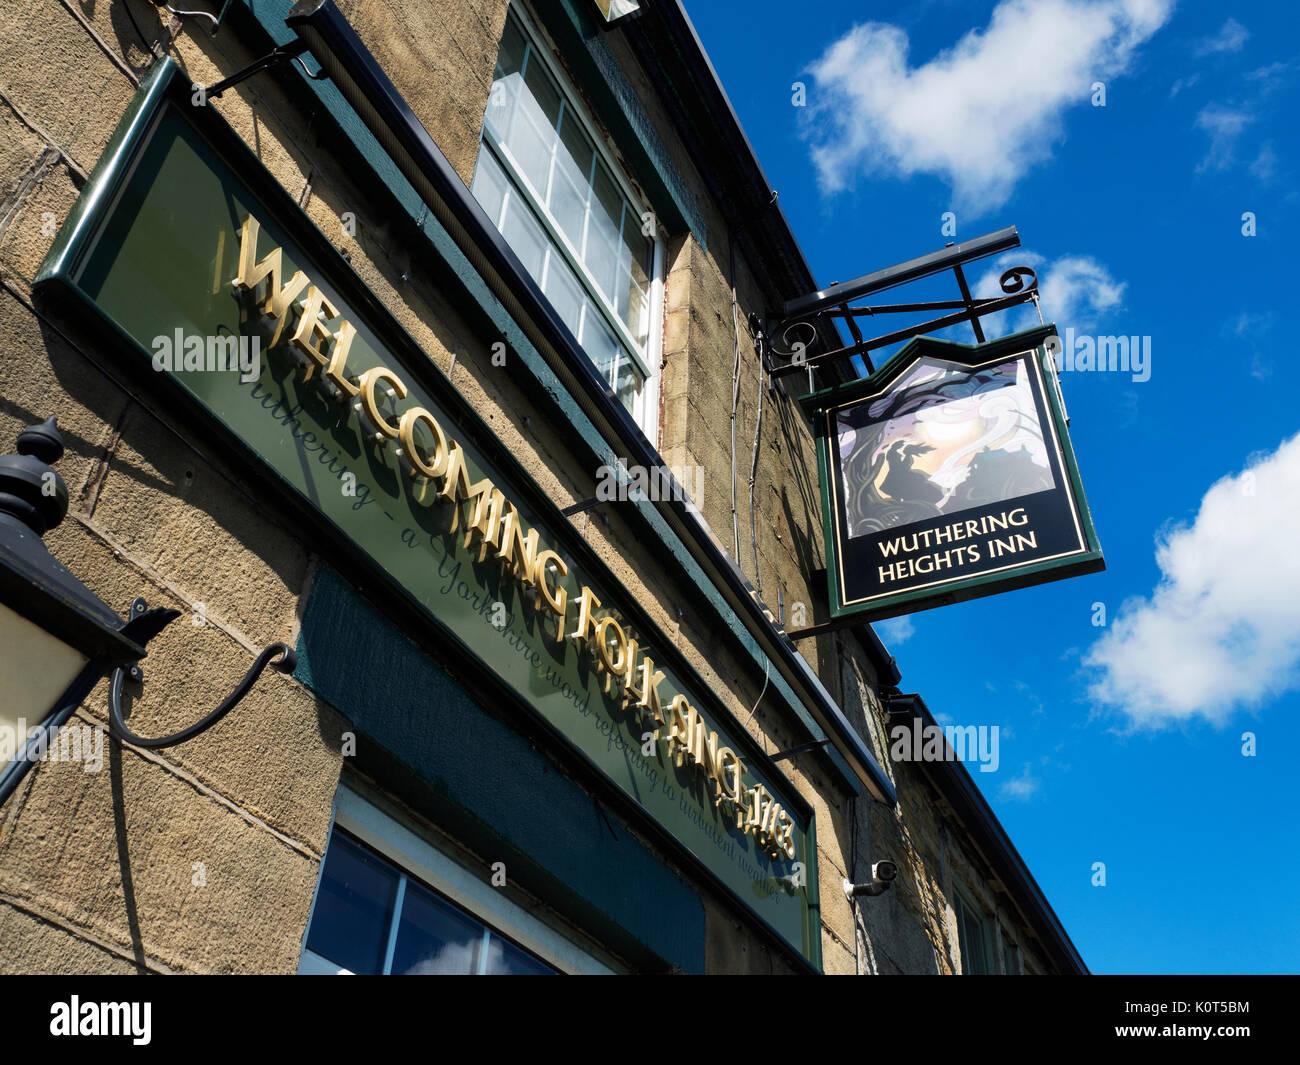 Le Wuthering Heights Inn à Stanbury près de Haworth West Yorkshire Angleterre Banque D'Images